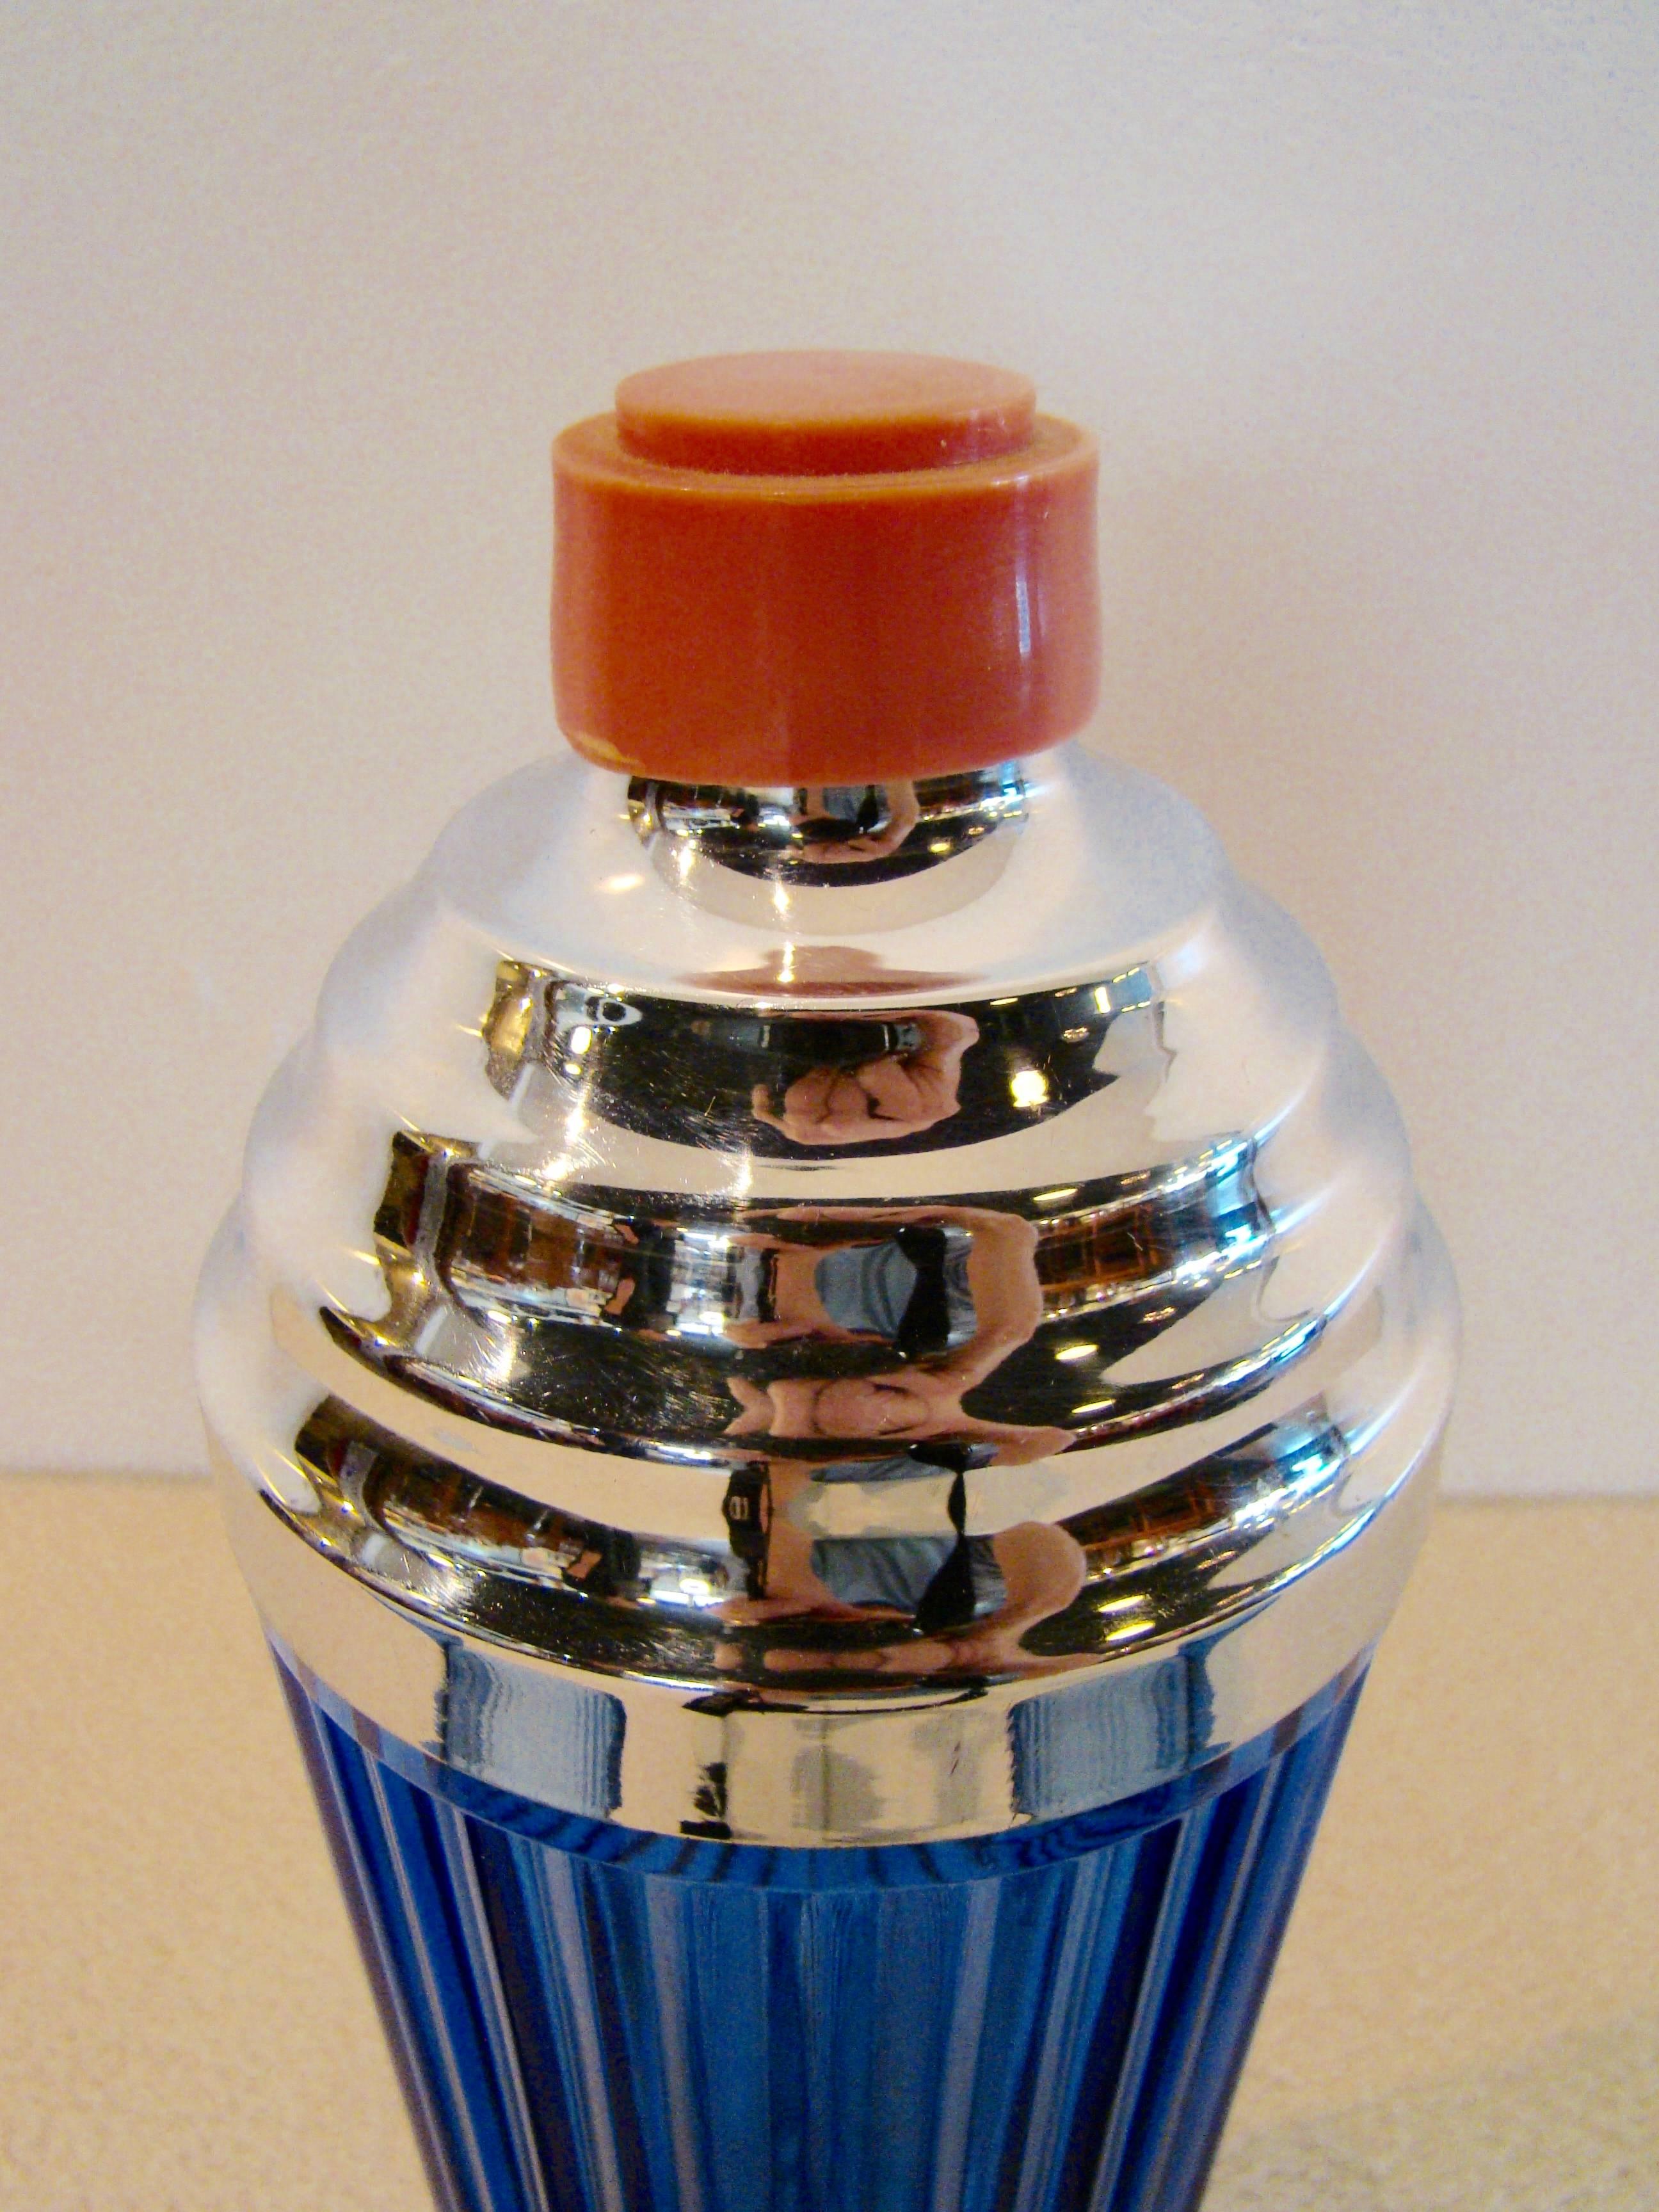 Art deco cobalt cocktail shaker with chrome stepped top and bakelite spout cap. Matching glasses are also ribbed with chrome stepped bases. The epitome and glamour of the deco era. Drink in style!
Measures: Shaker is 11